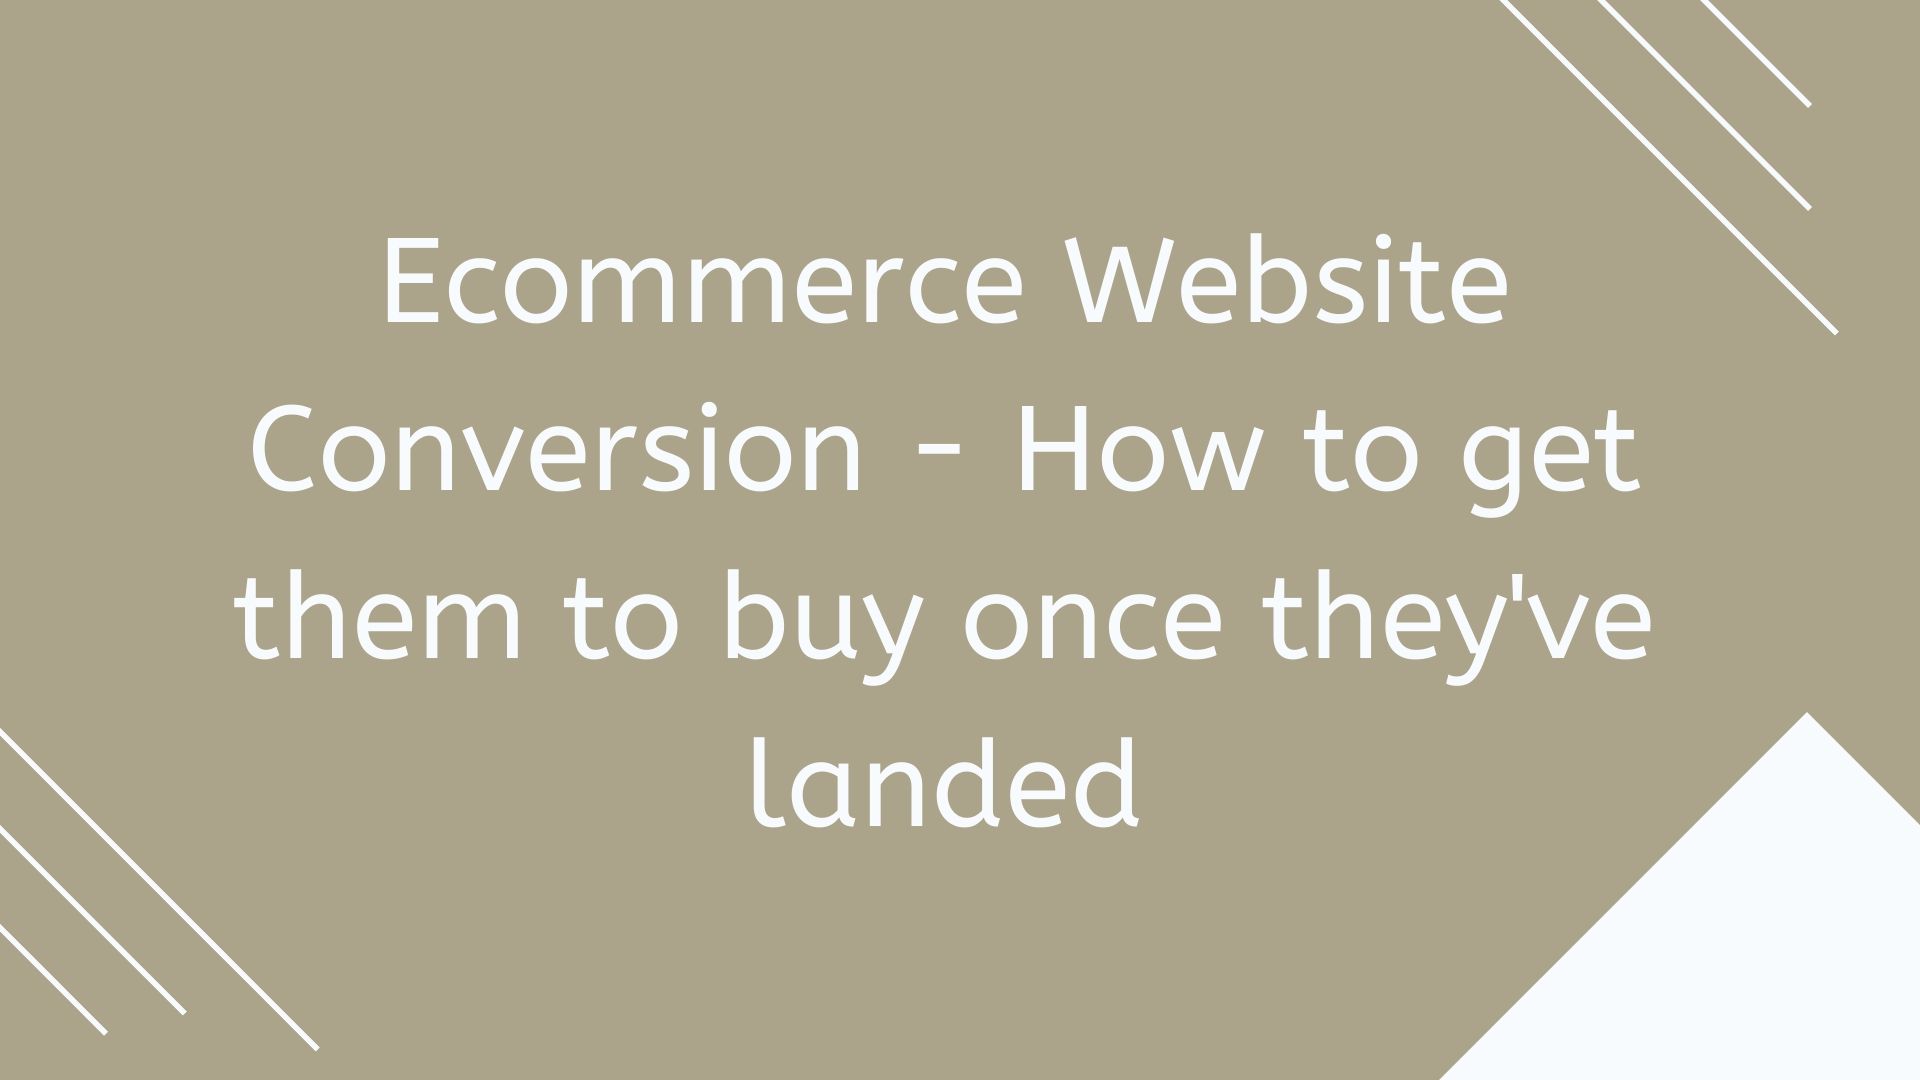 eCommerce Website Conversion - How to get them to buy once they've landed